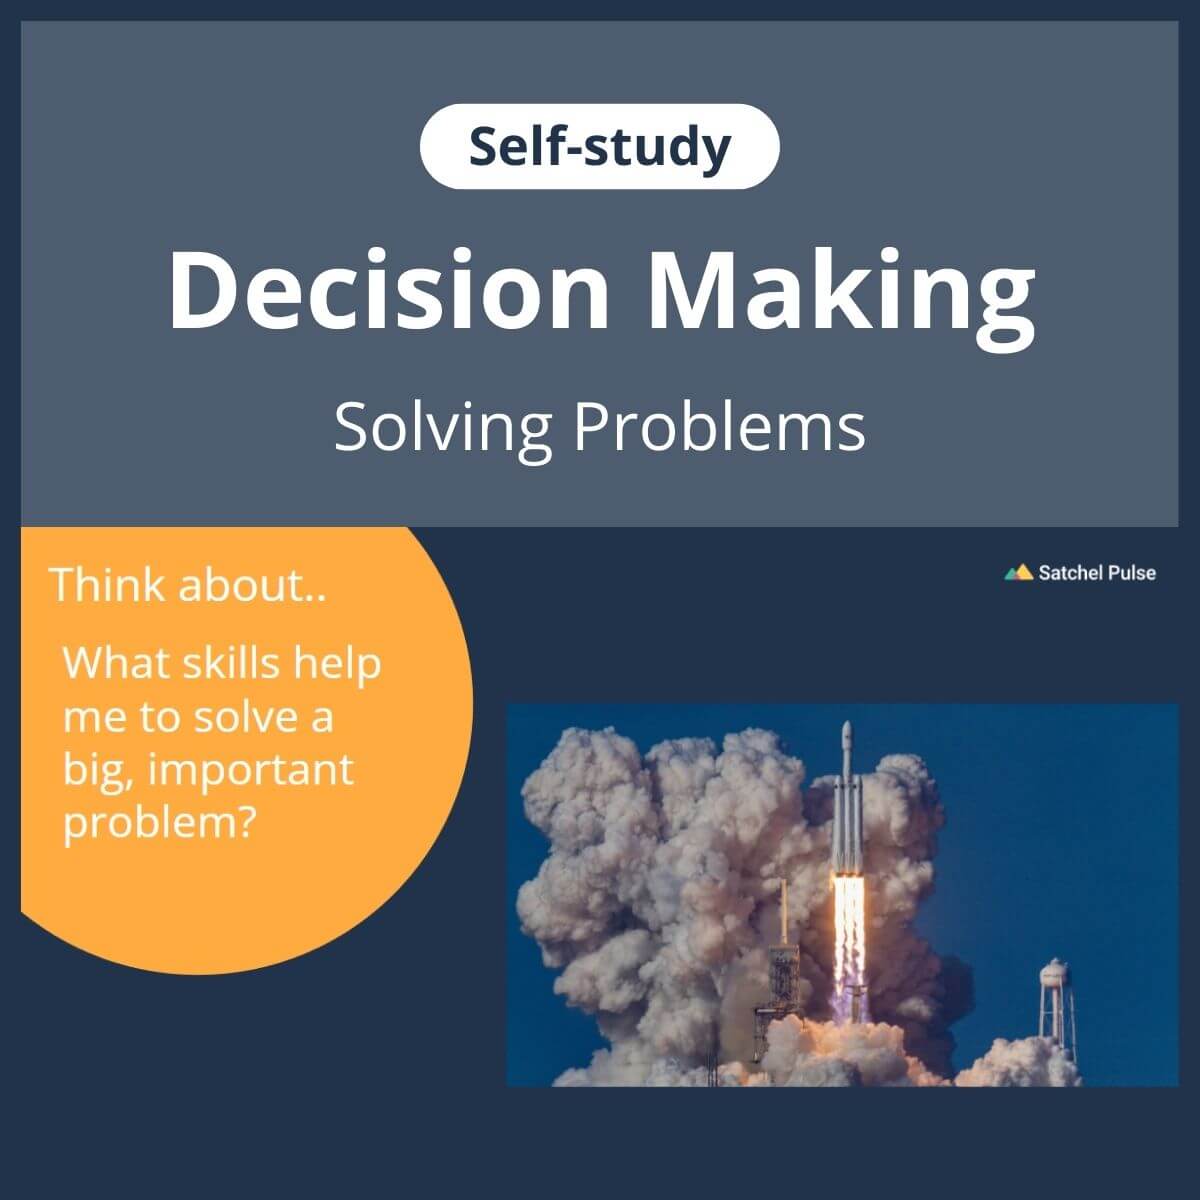 SEL self-study focusing on Solving Problems to use in your classroom as one of your SEL activities for Responsible Decision-Making